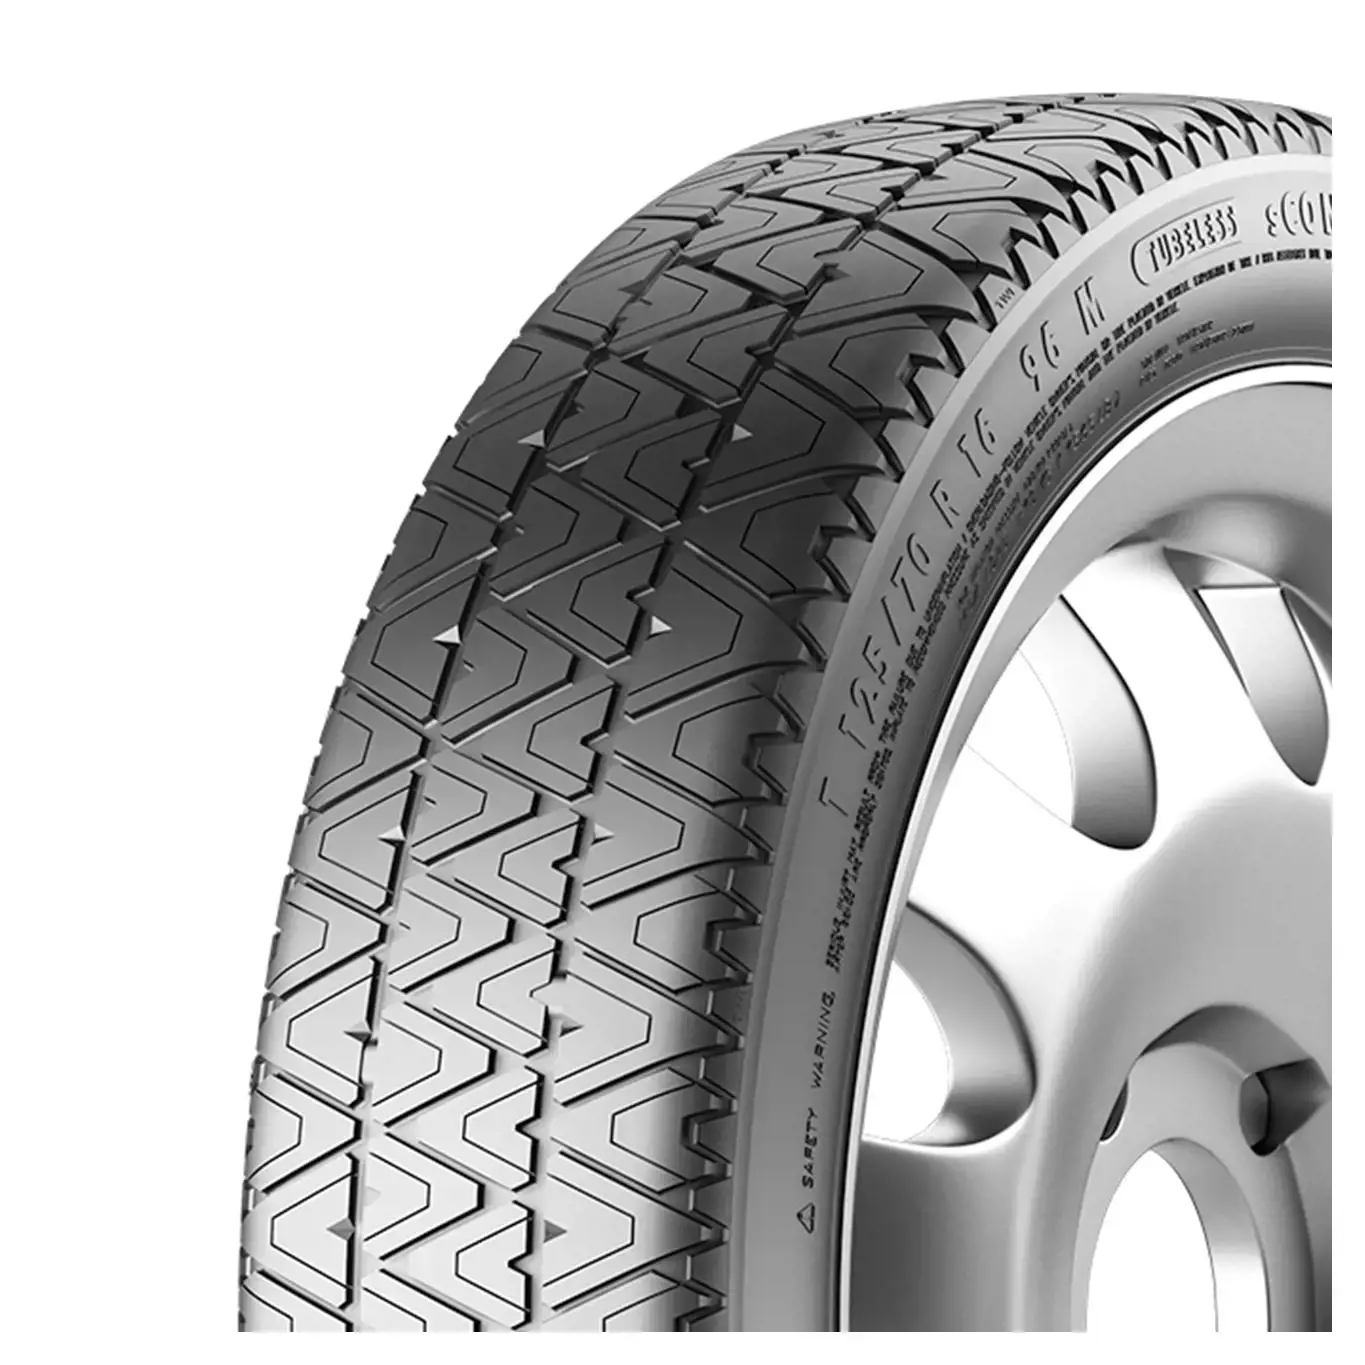 T145/85 R18 103M sContact